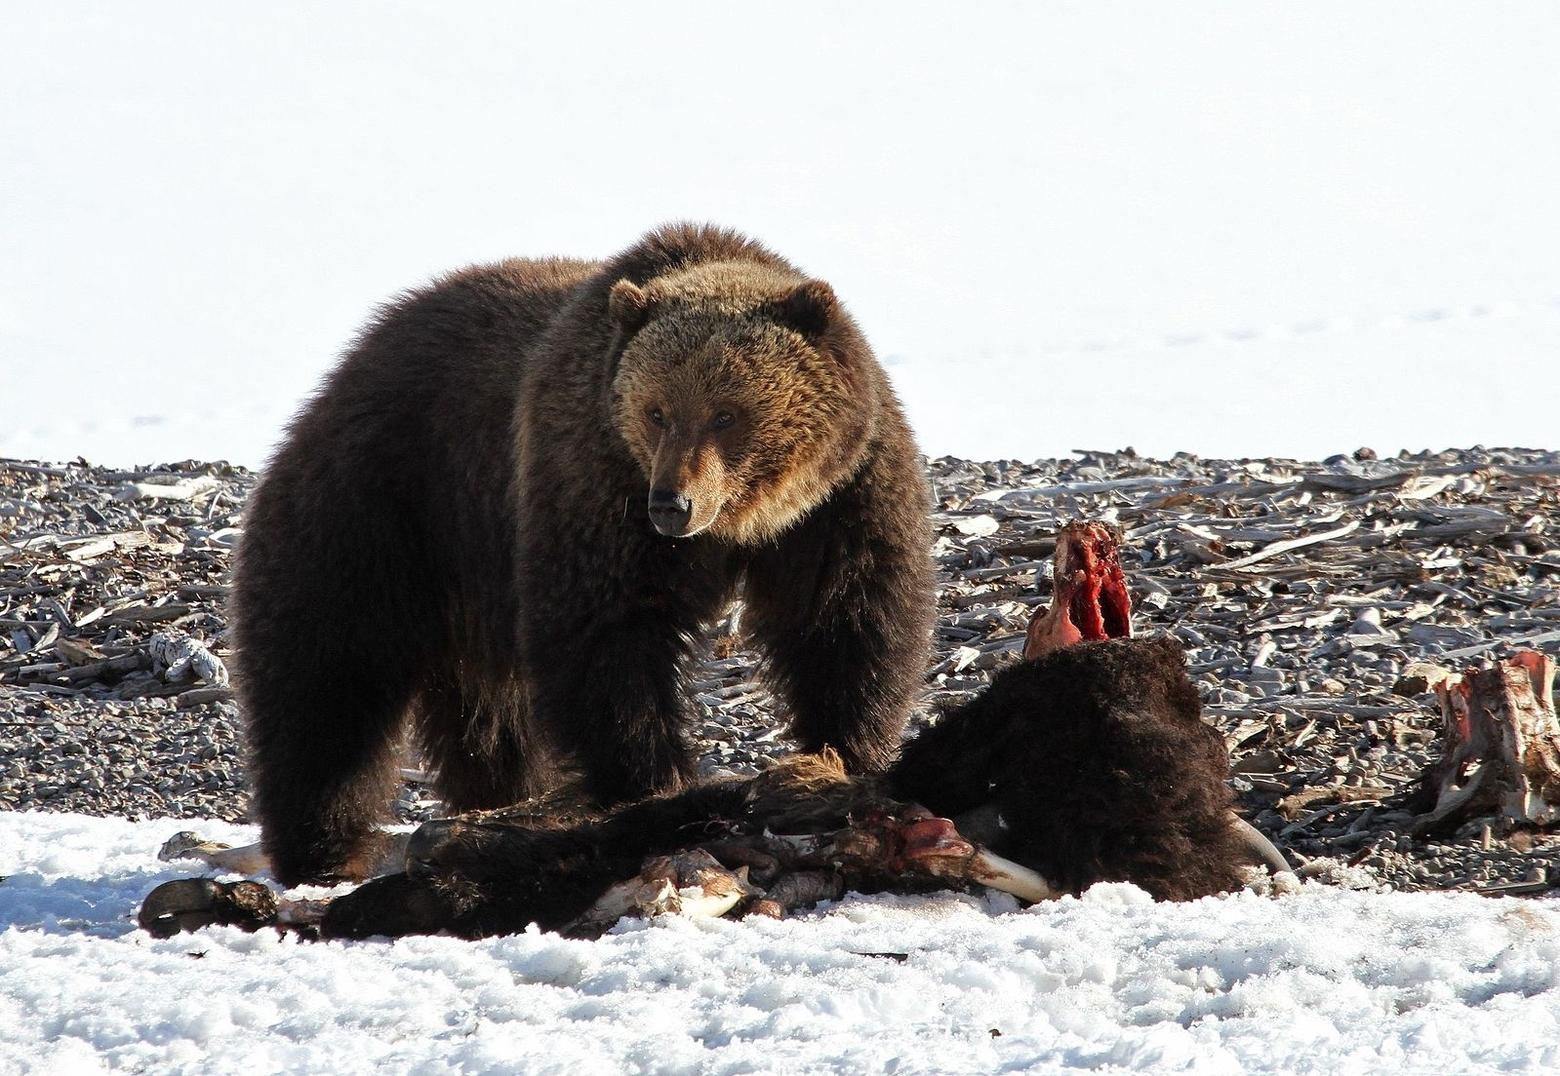 A grizzly feasts on a bison carcass in Yellowstone. Photo courtesy Jim Peaco/NPS